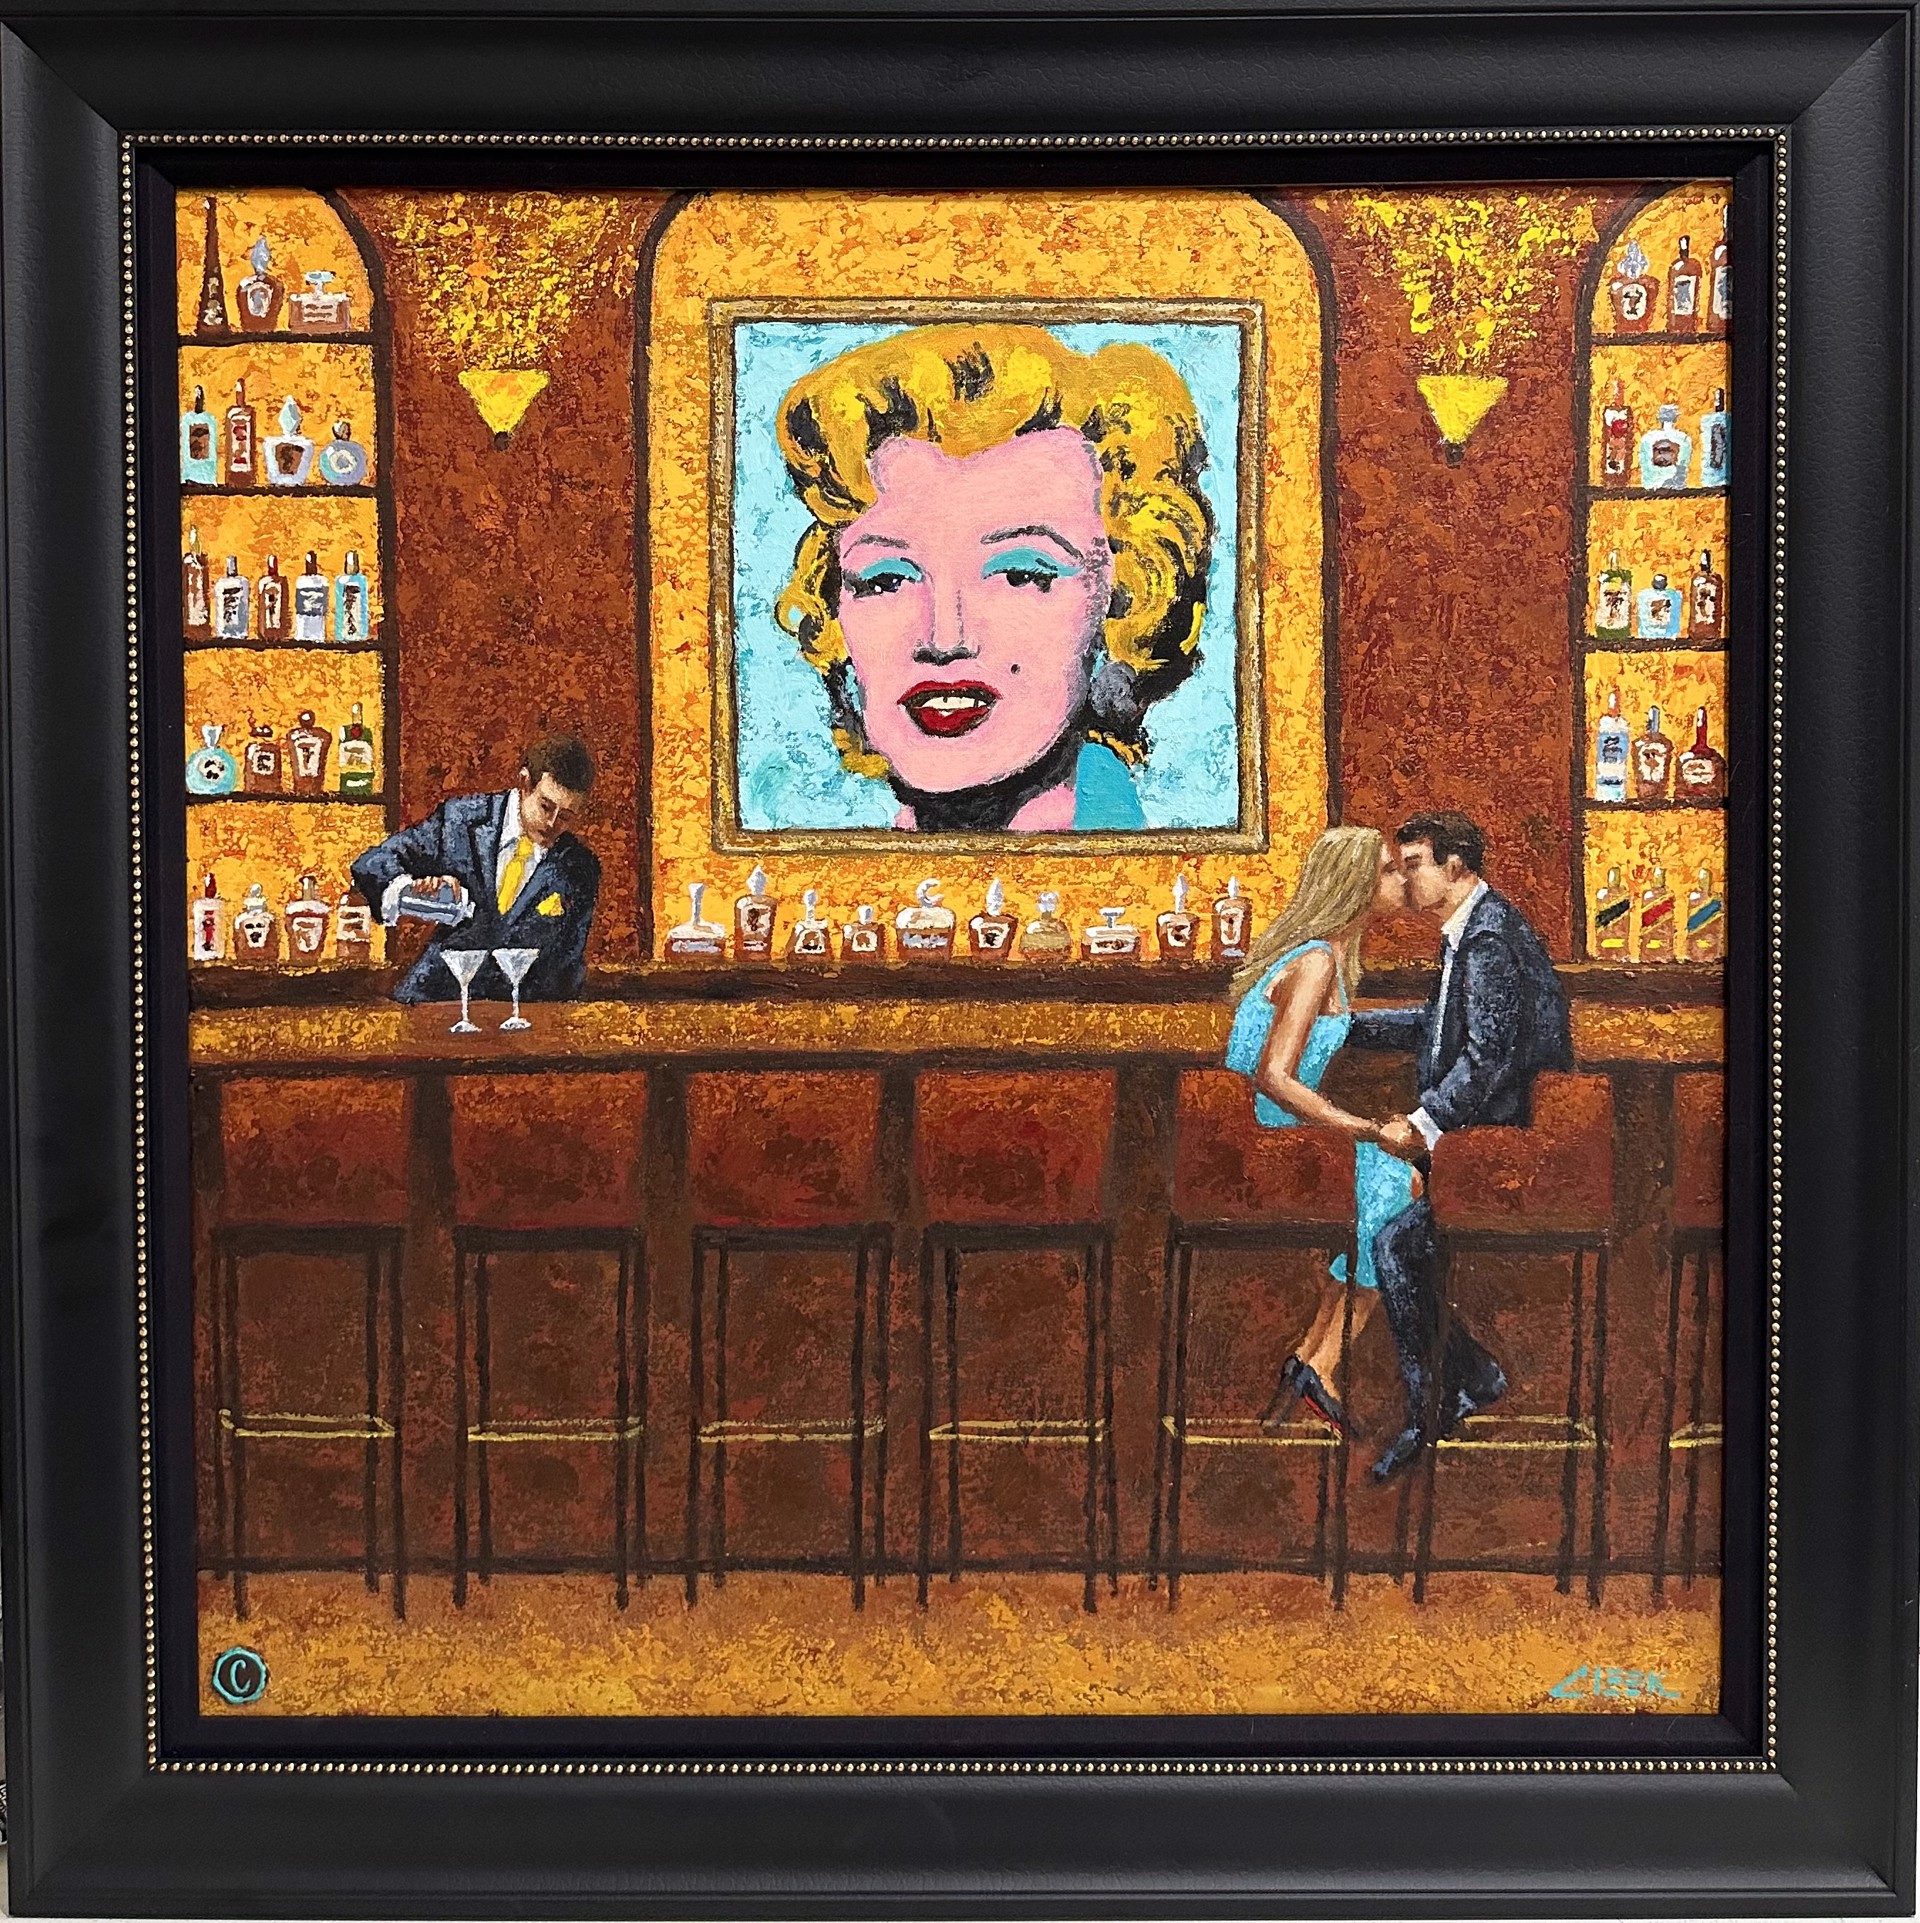 Martinis With Marilyn by Scott Cleek